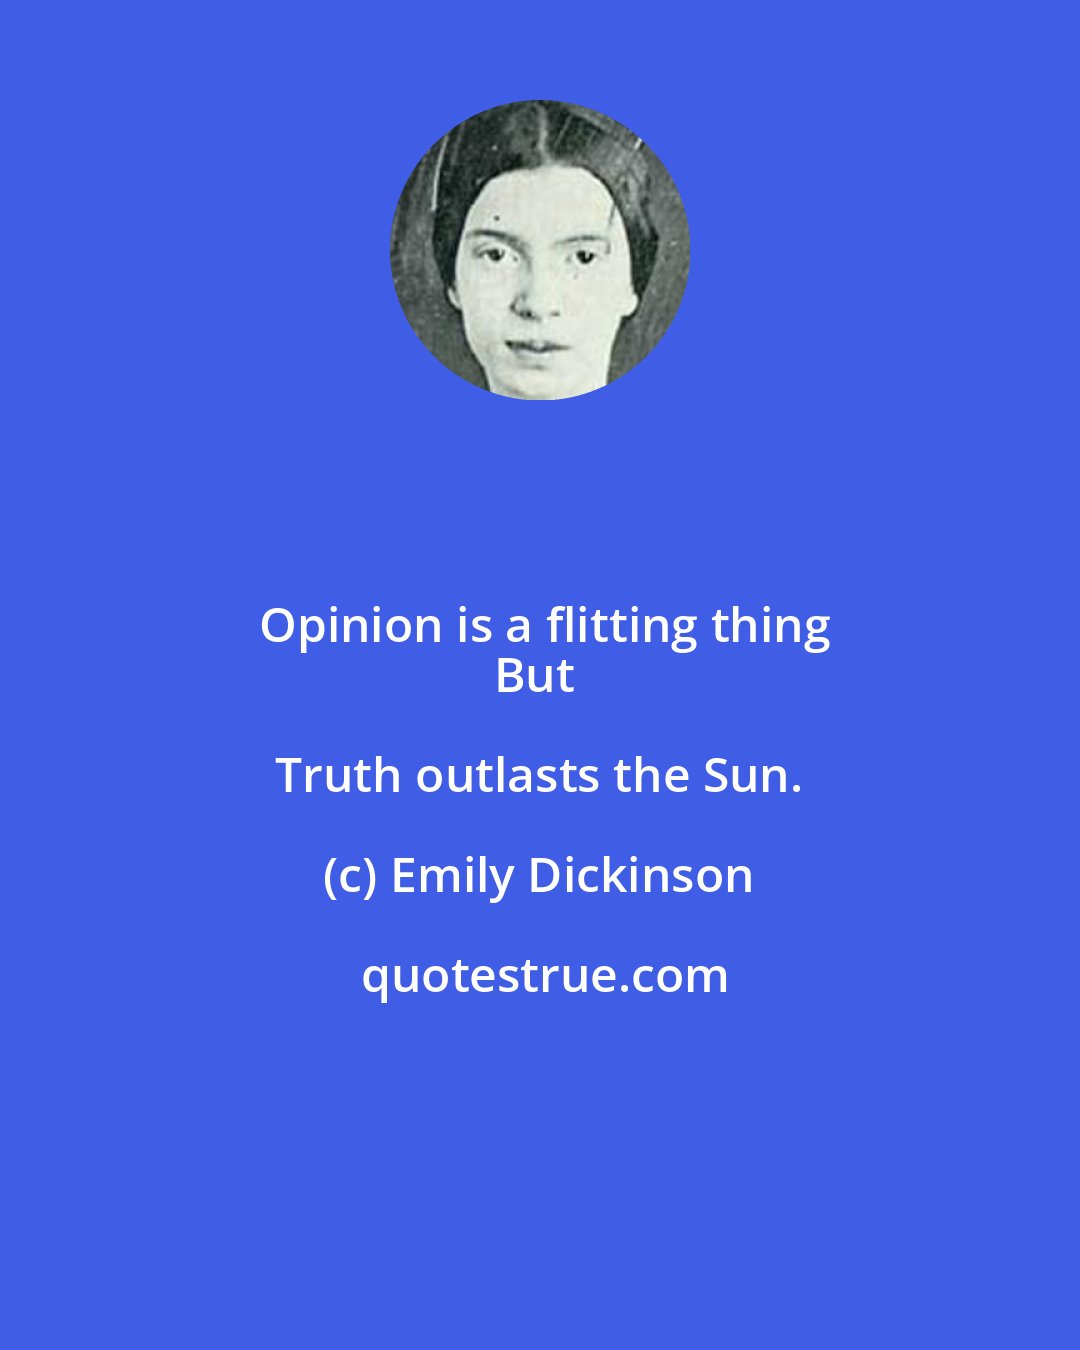 Emily Dickinson: Opinion is a flitting thing
But Truth outlasts the Sun.